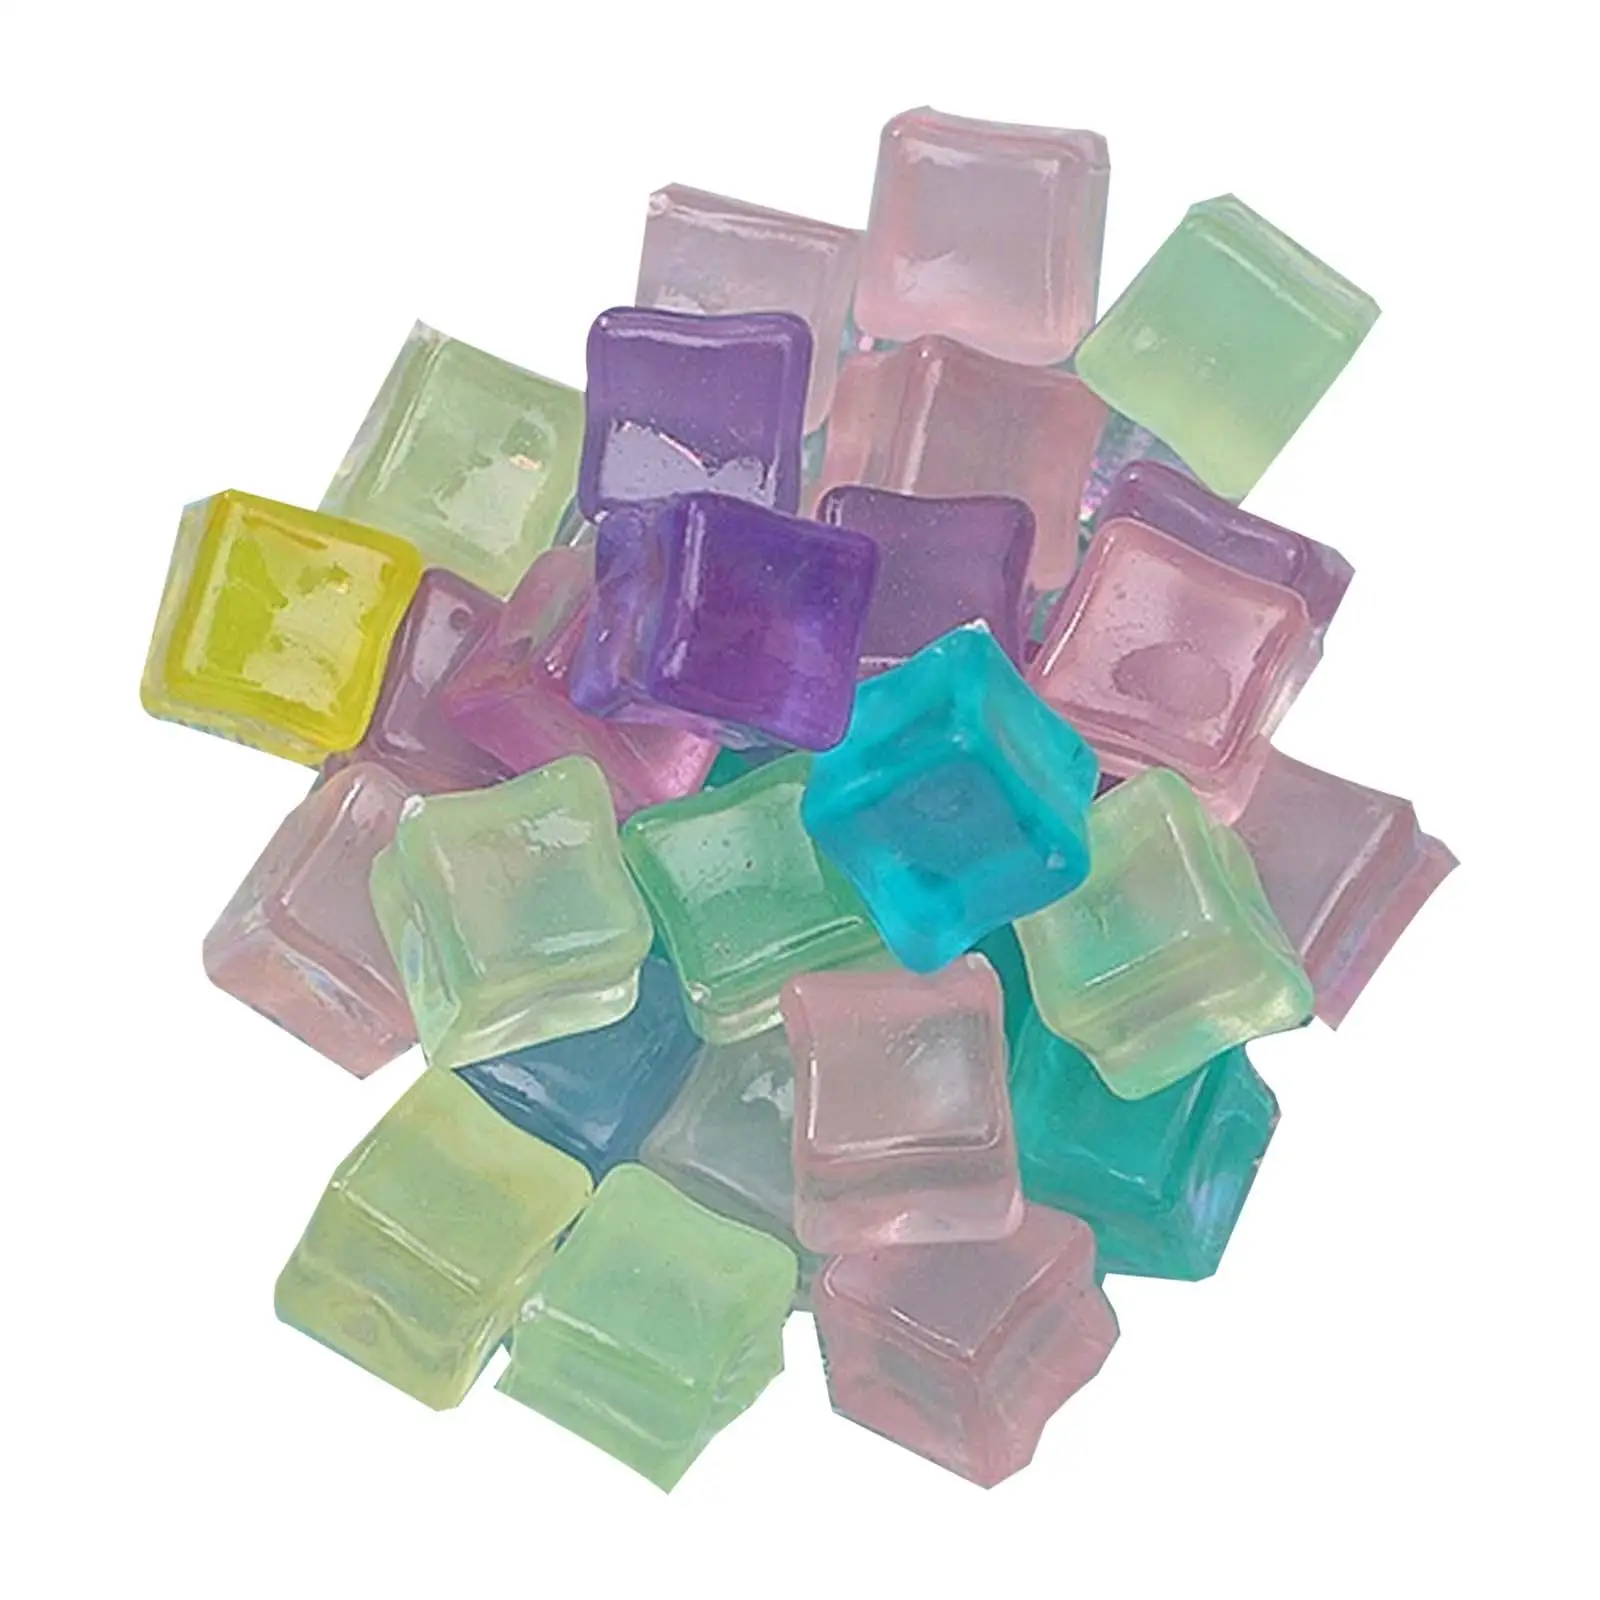 Acrylic Ice Cubes Photography Props Square Shape Ice Cubes for Home Events